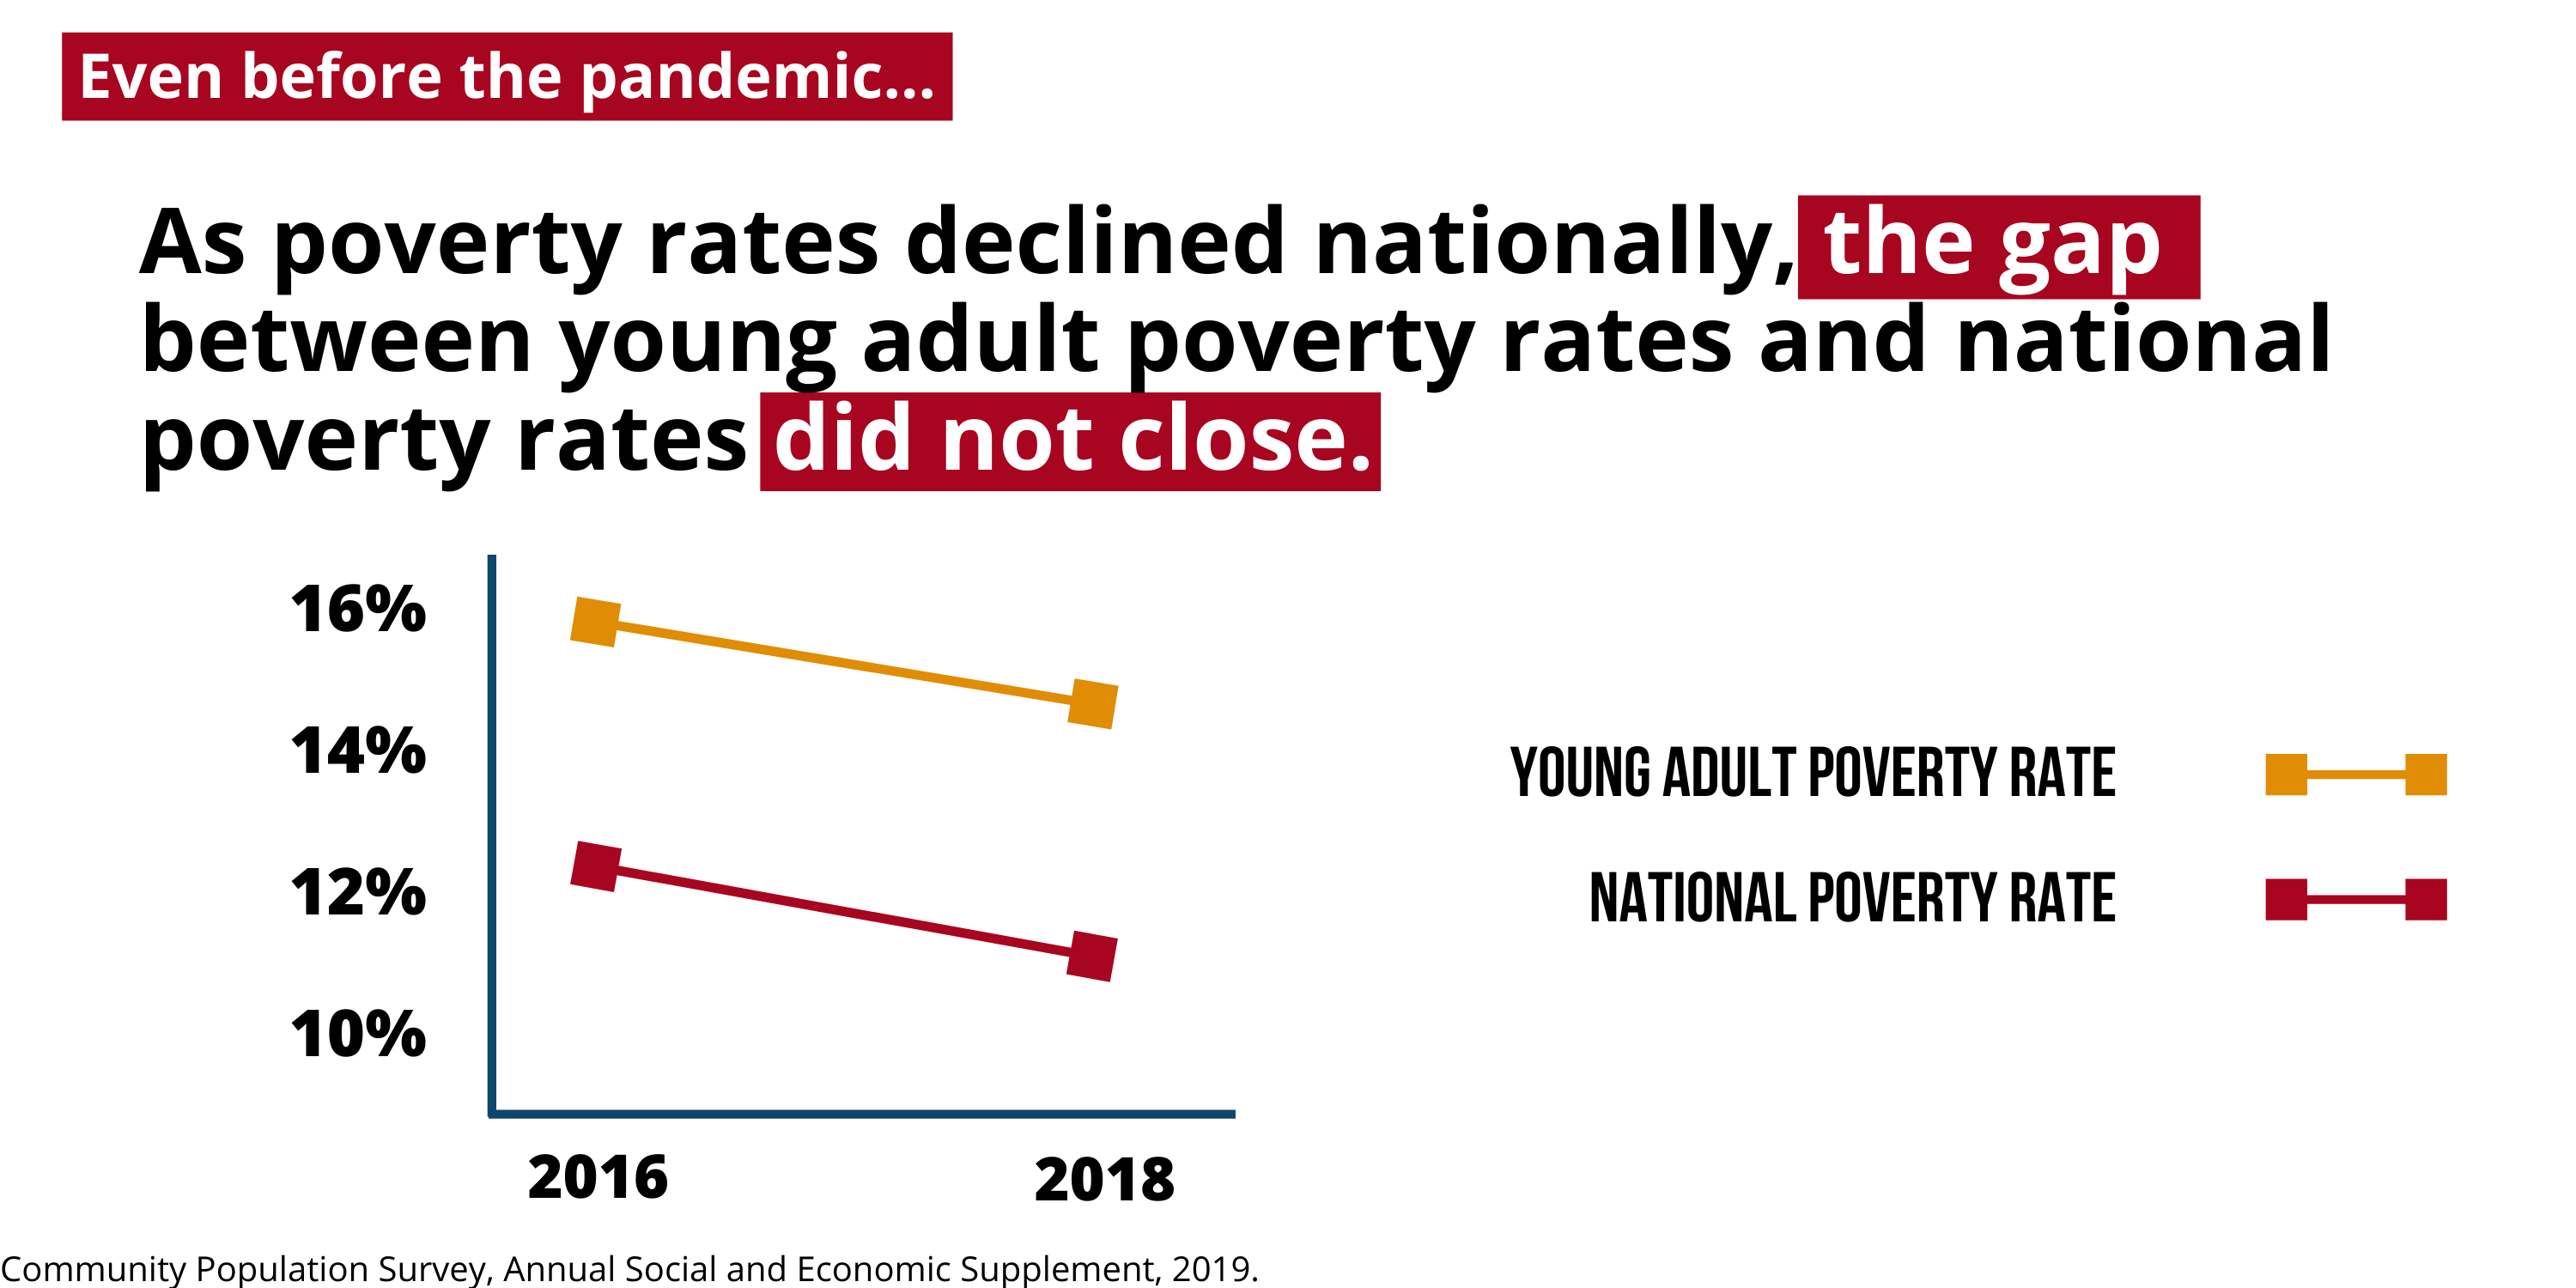 As poverty rates declined nationally, the gap between young adult poverty rates and national poverty rates did not close.